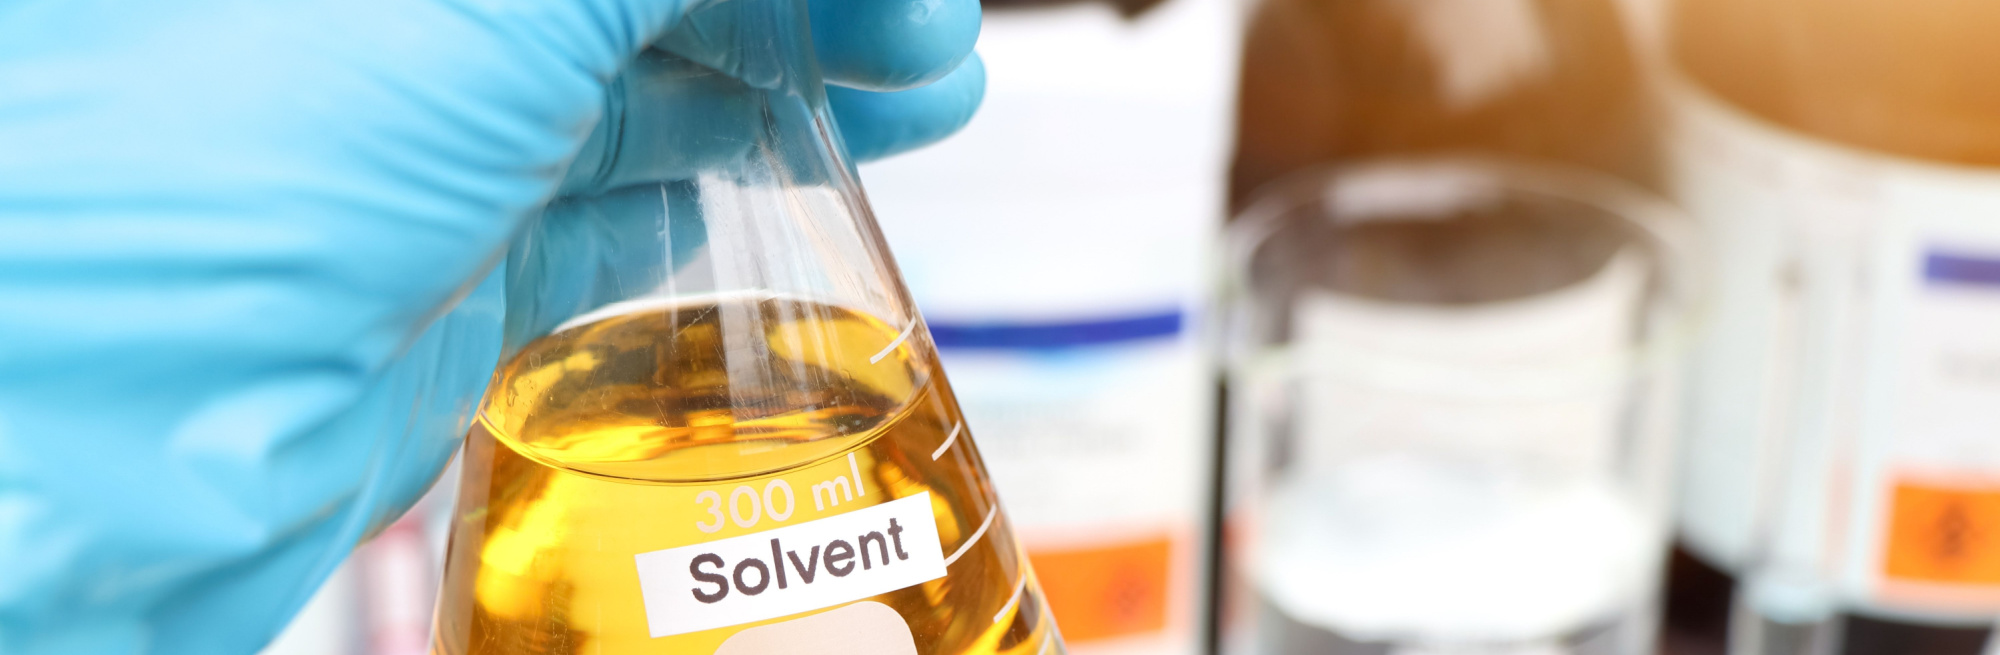 image of solvents 